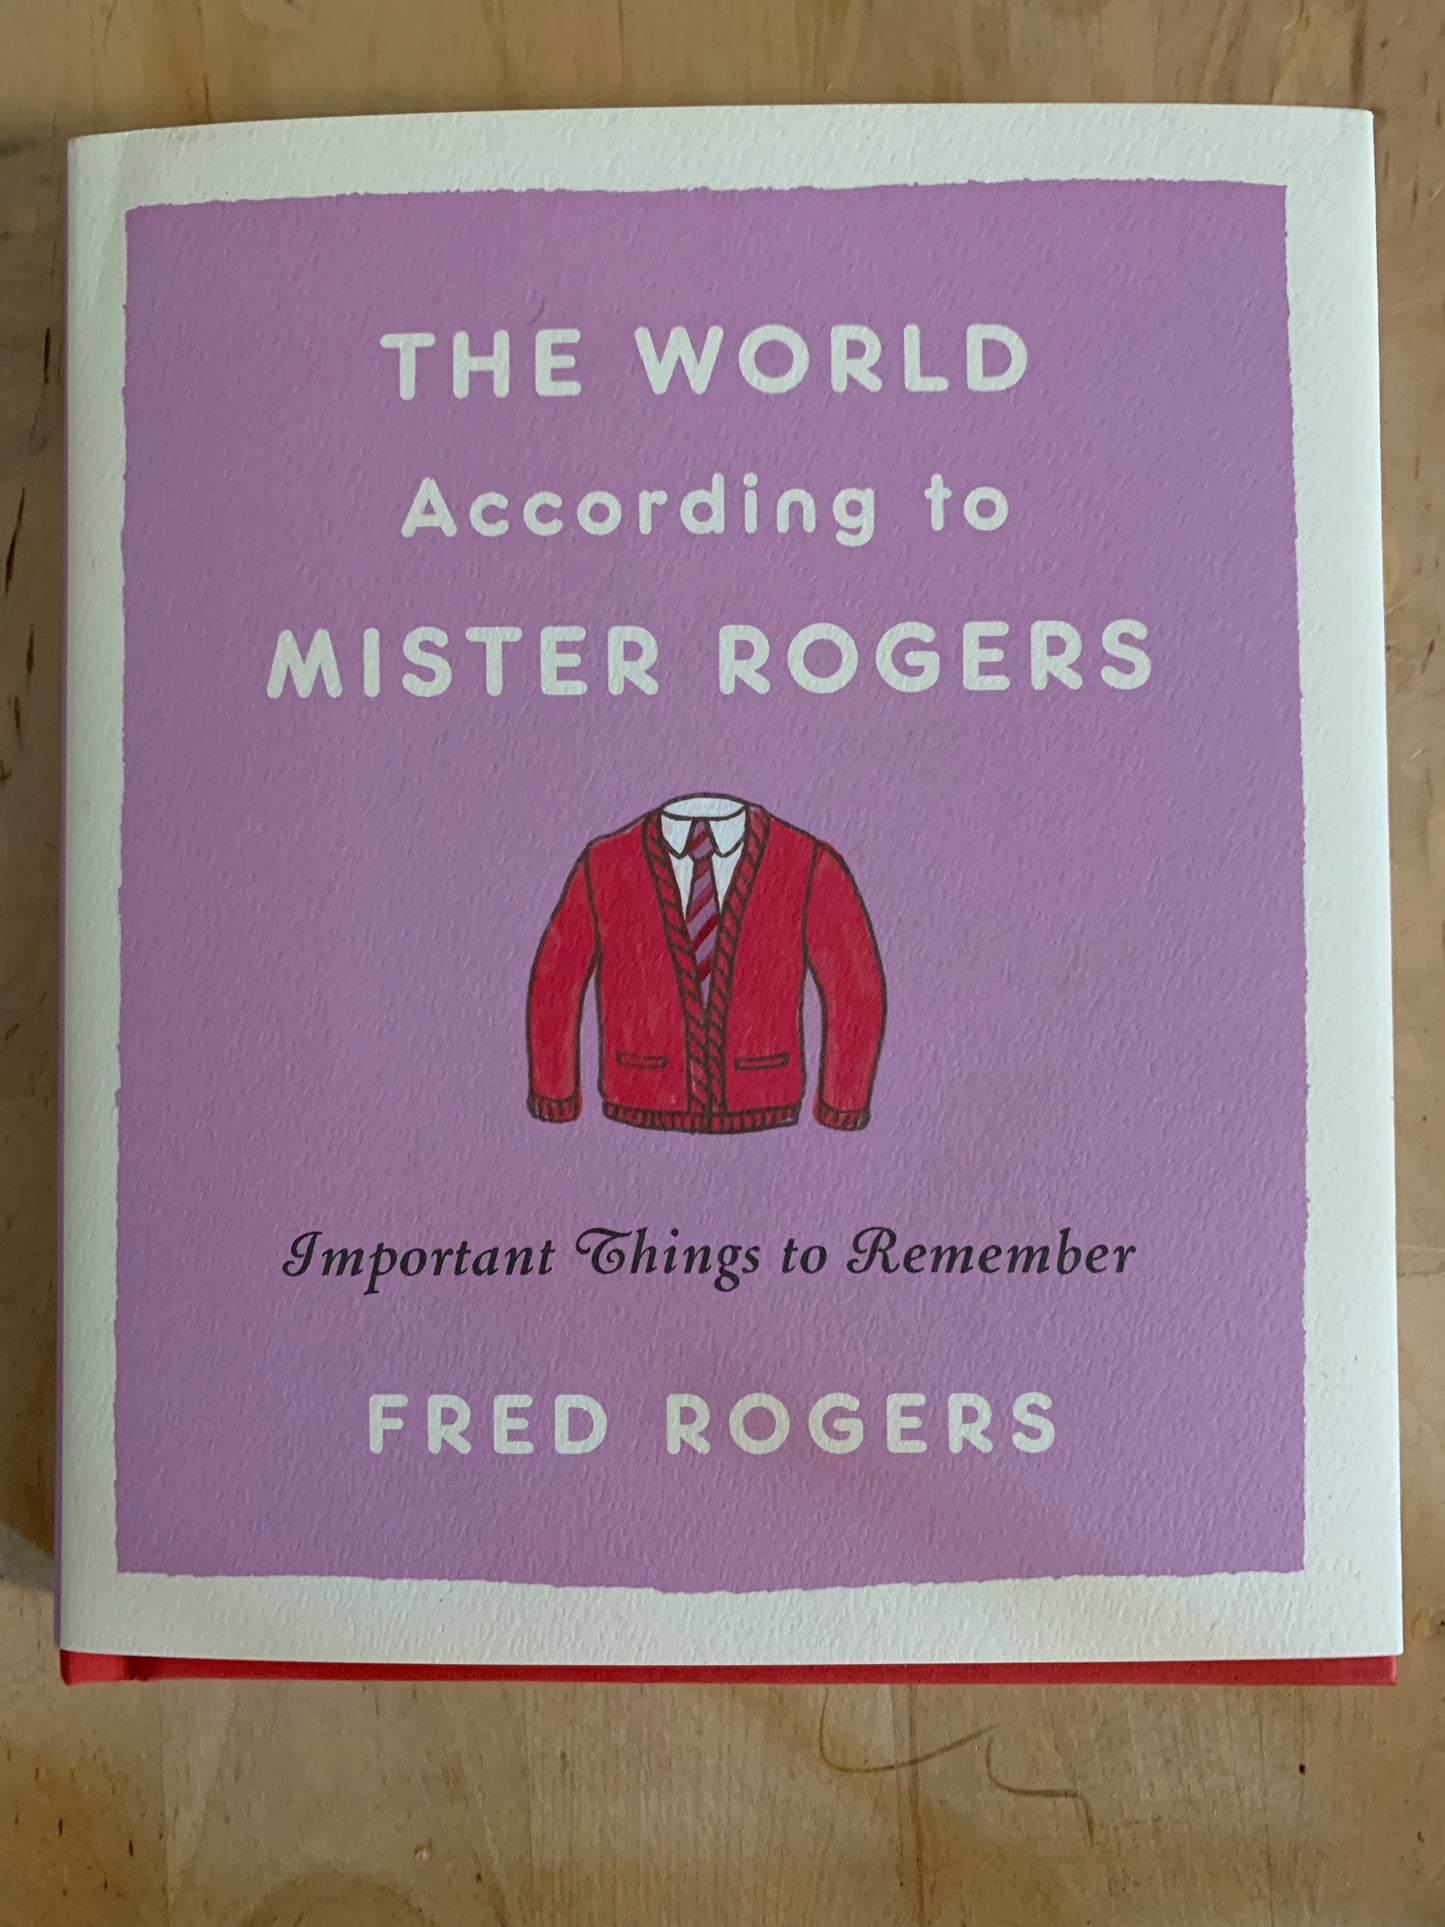 The World According to Mr. Rogers